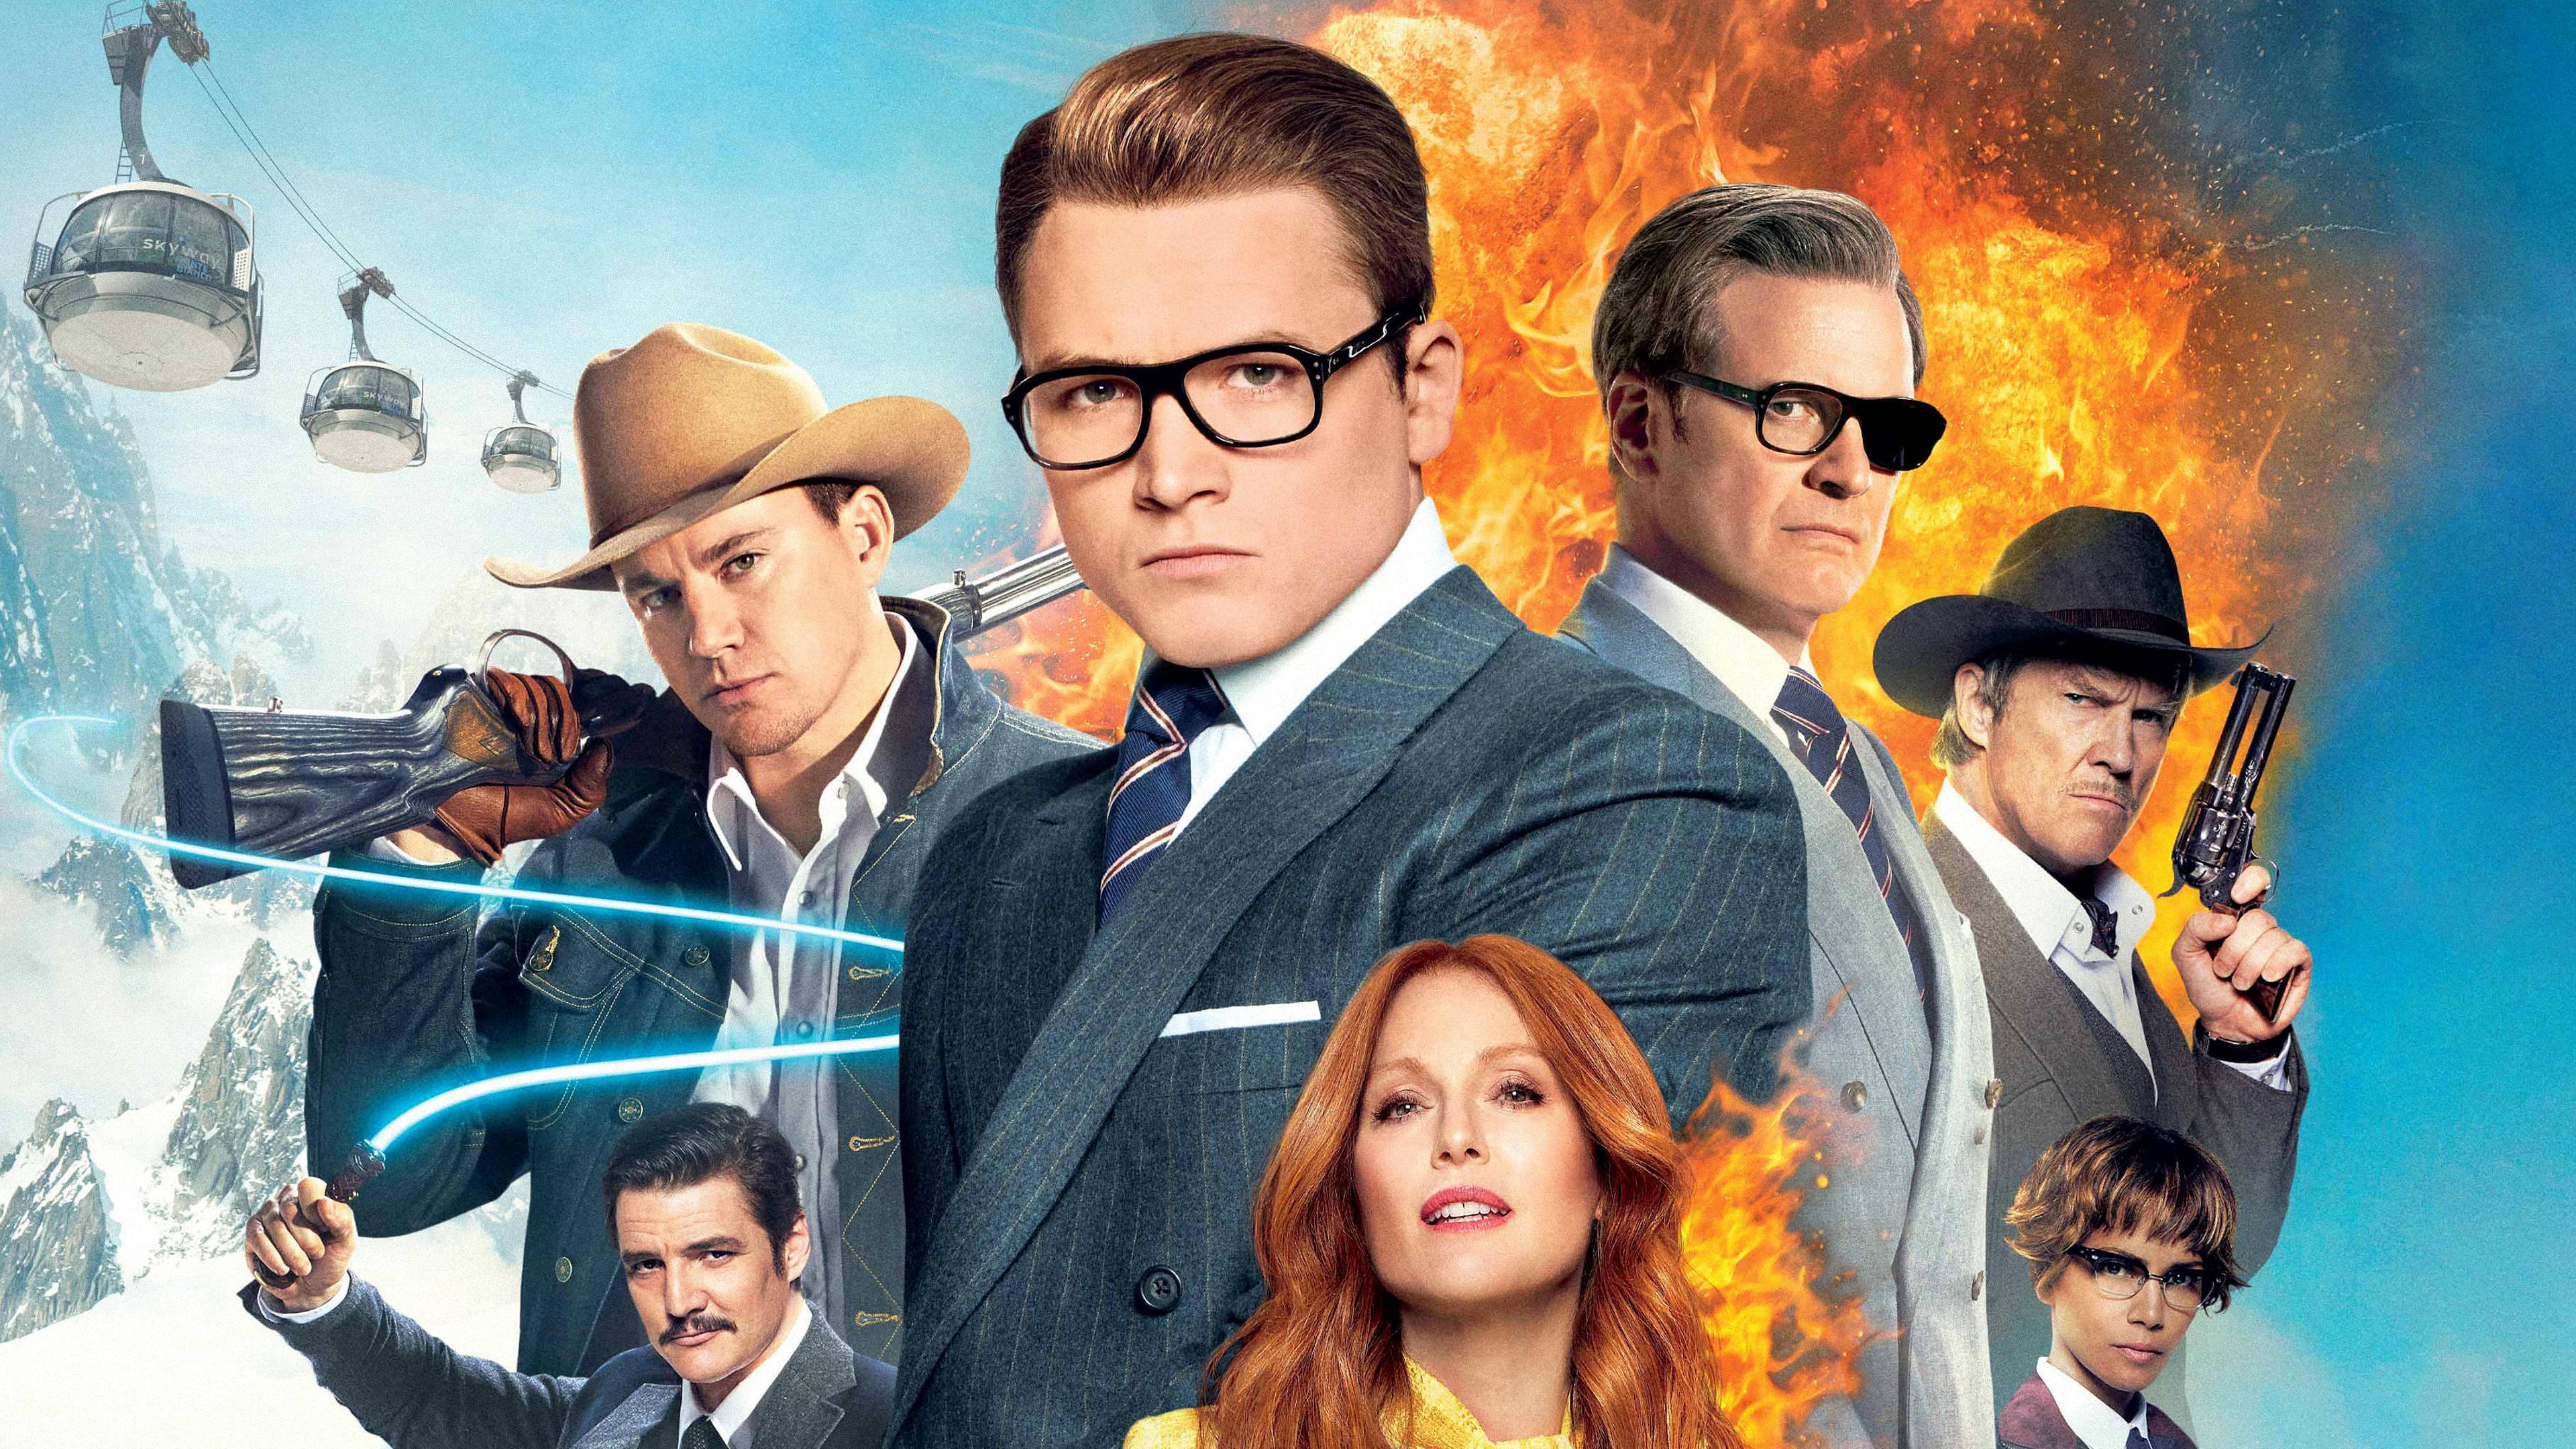 Kingsman: The Golden Circle Picture